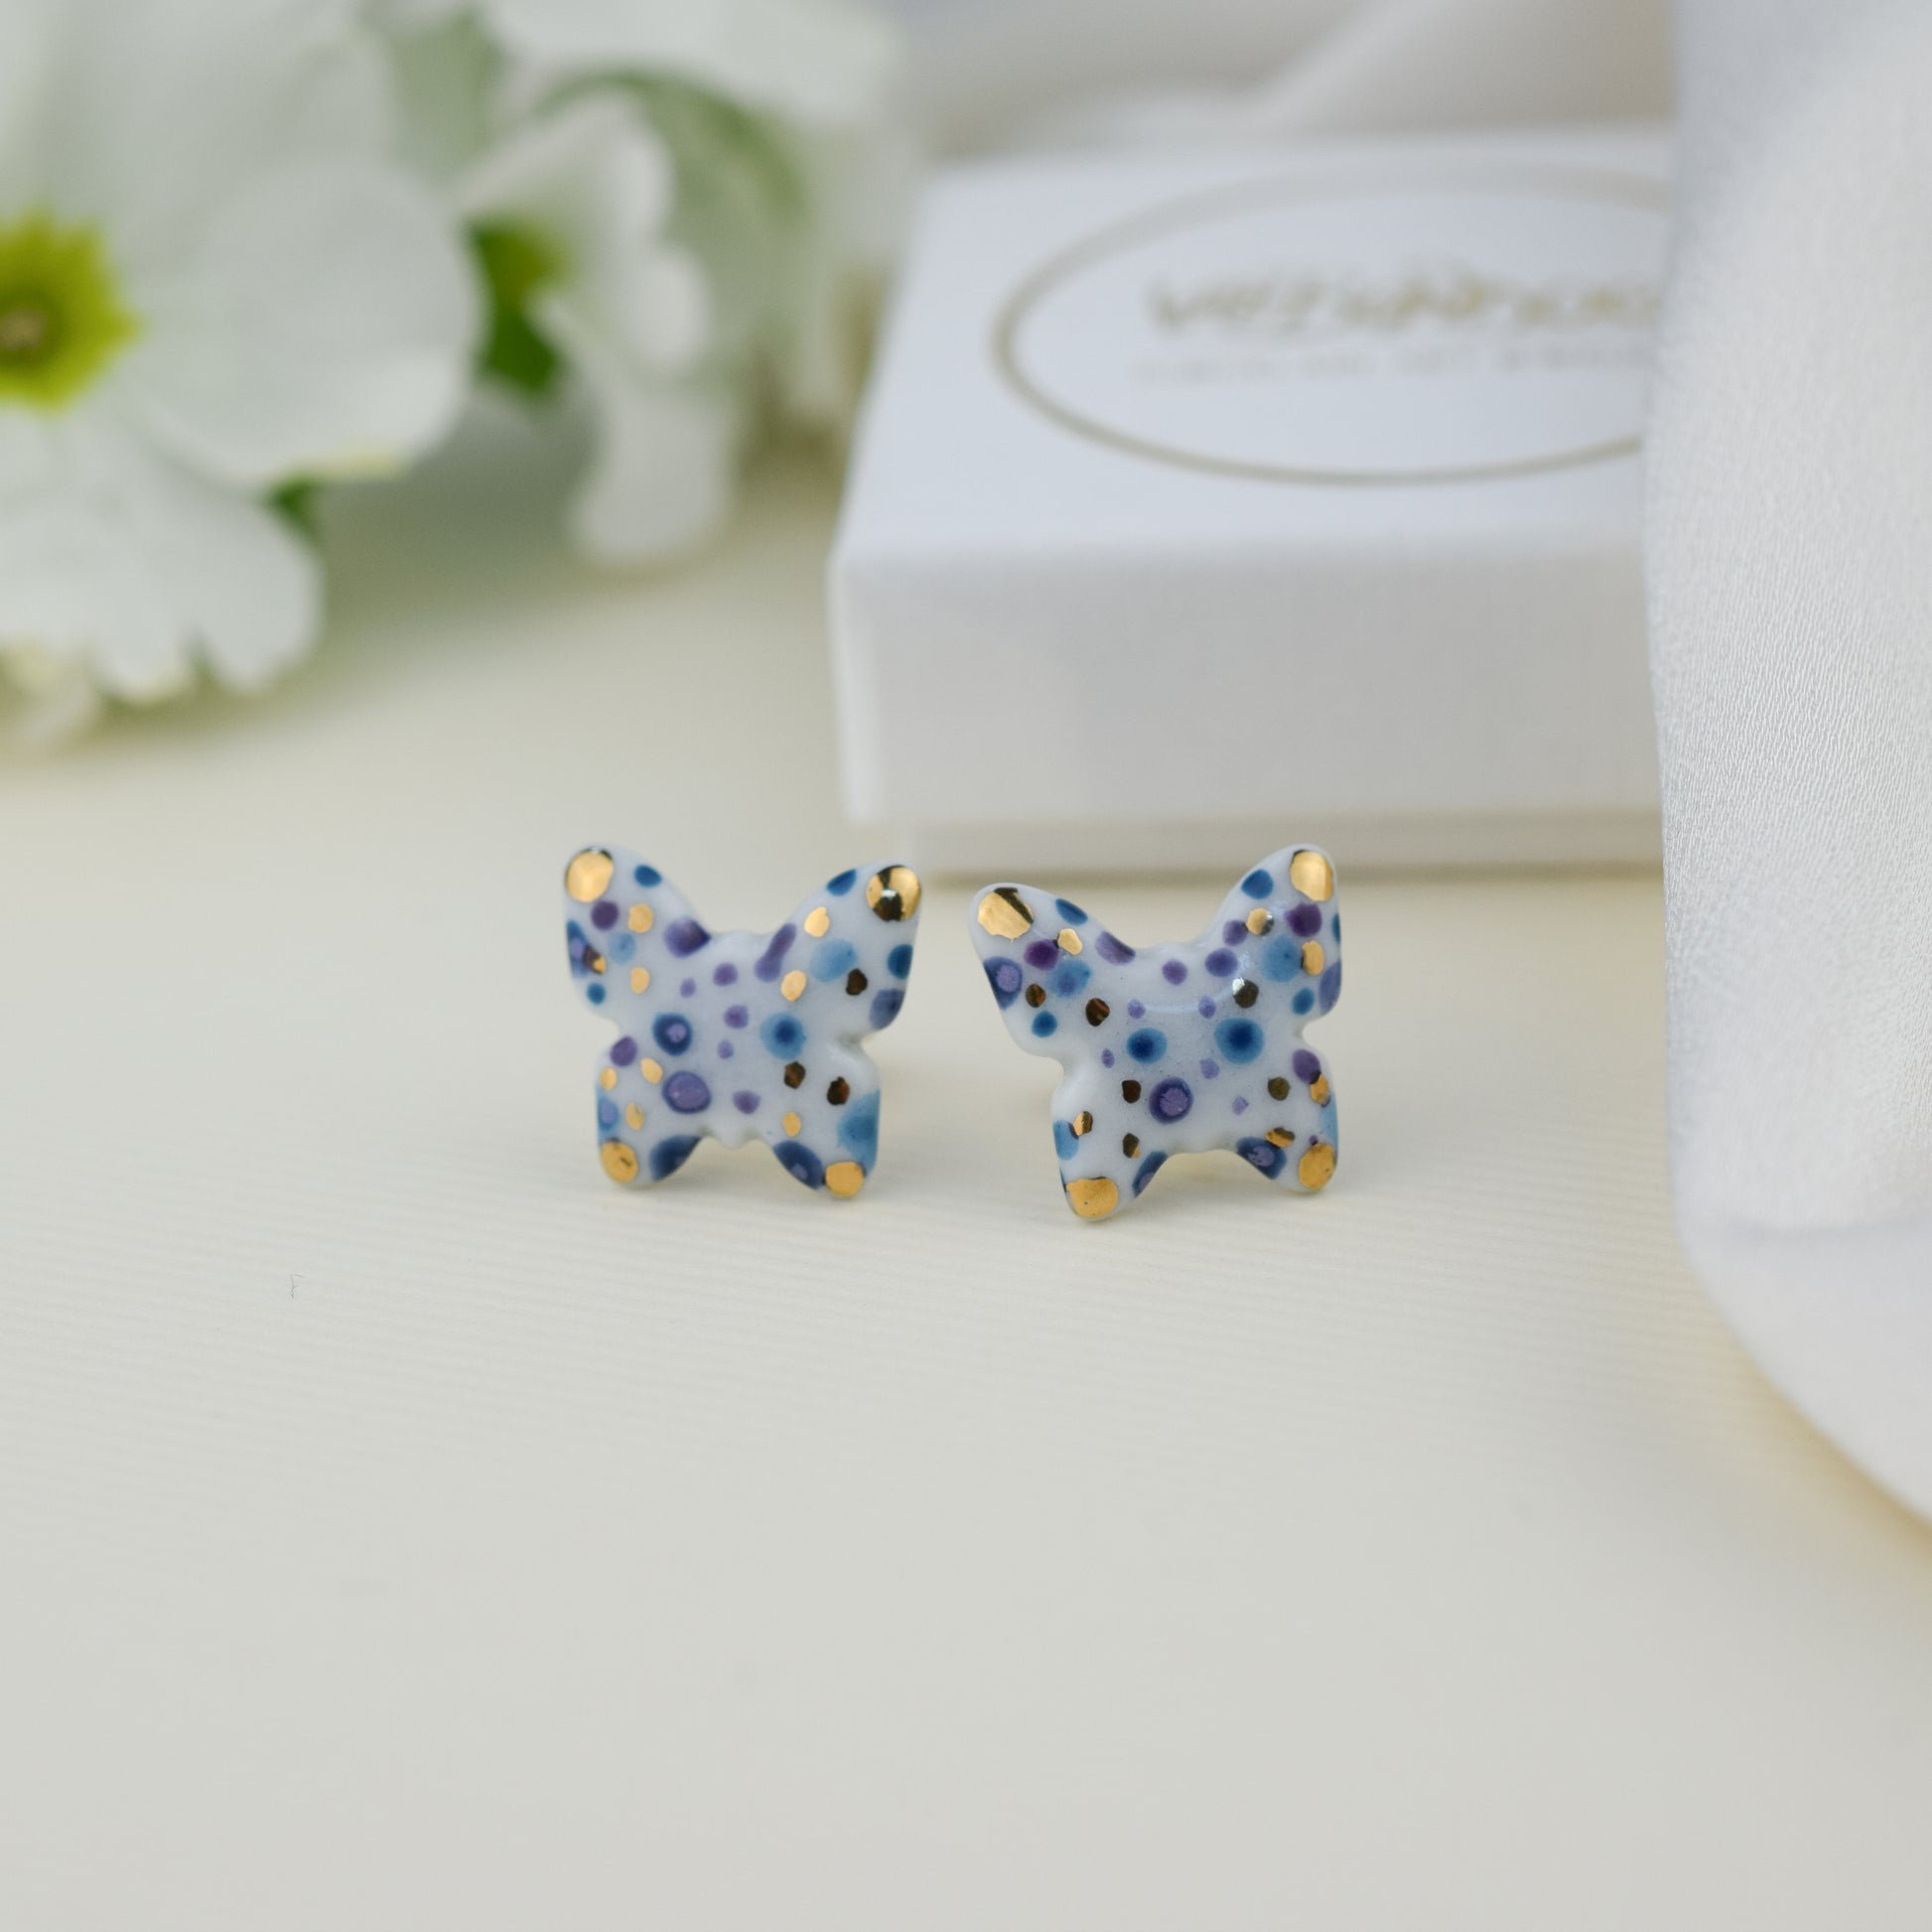 Butterfly. Porcelain stud earrings created and hand-painted by Vali Bondoc with high temperature ceramic dyes and colloidal gold